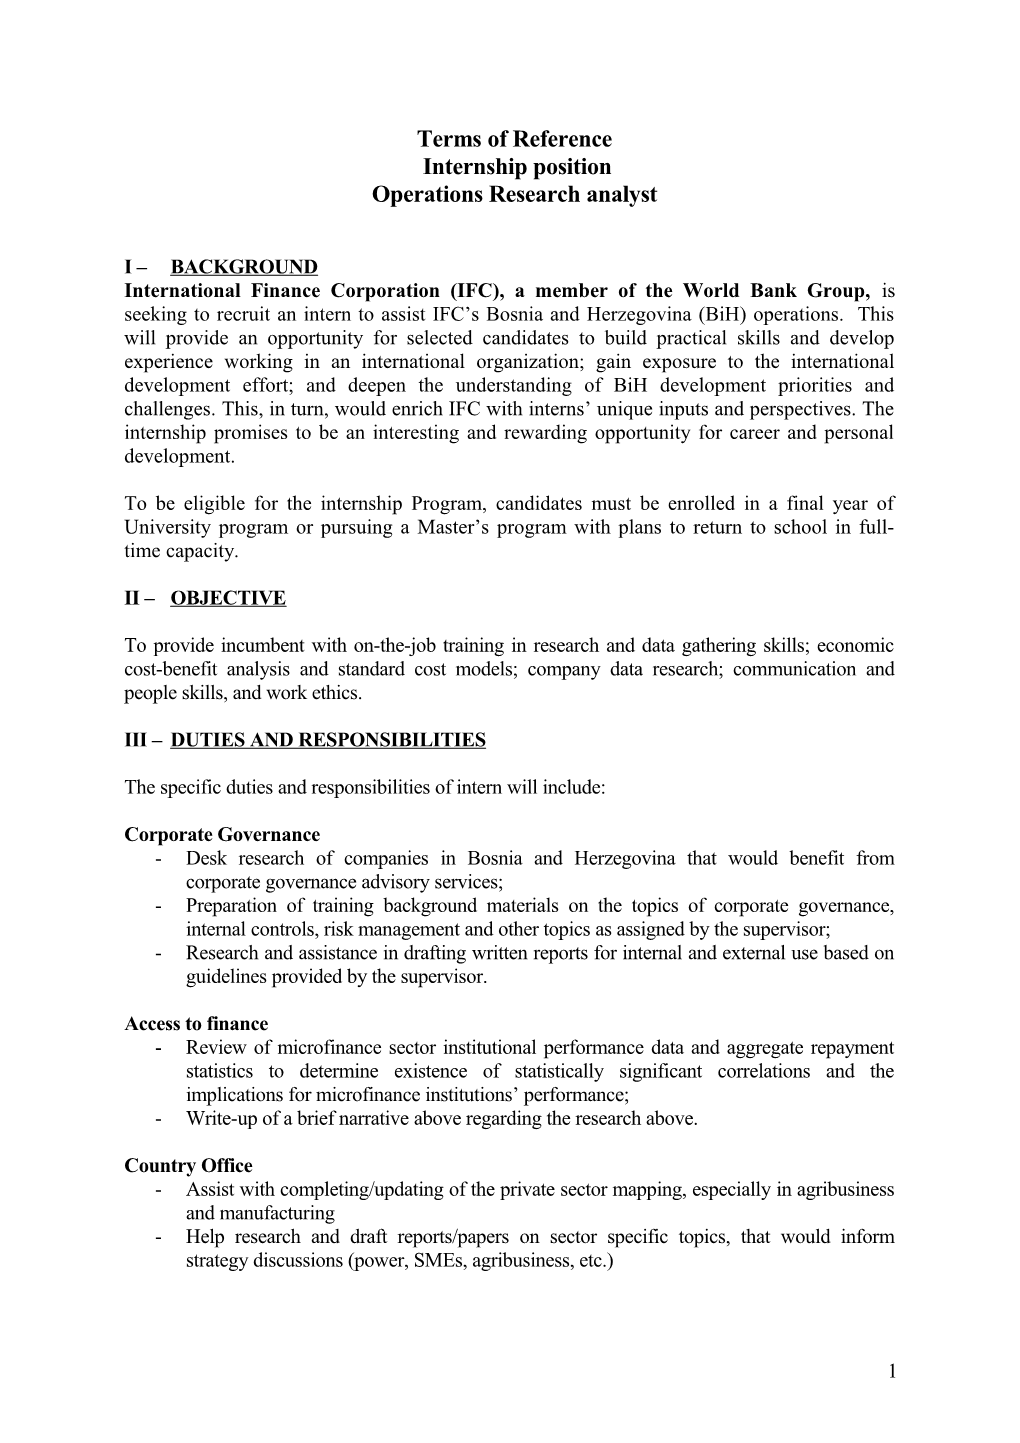 Terms of Reference Internship Position